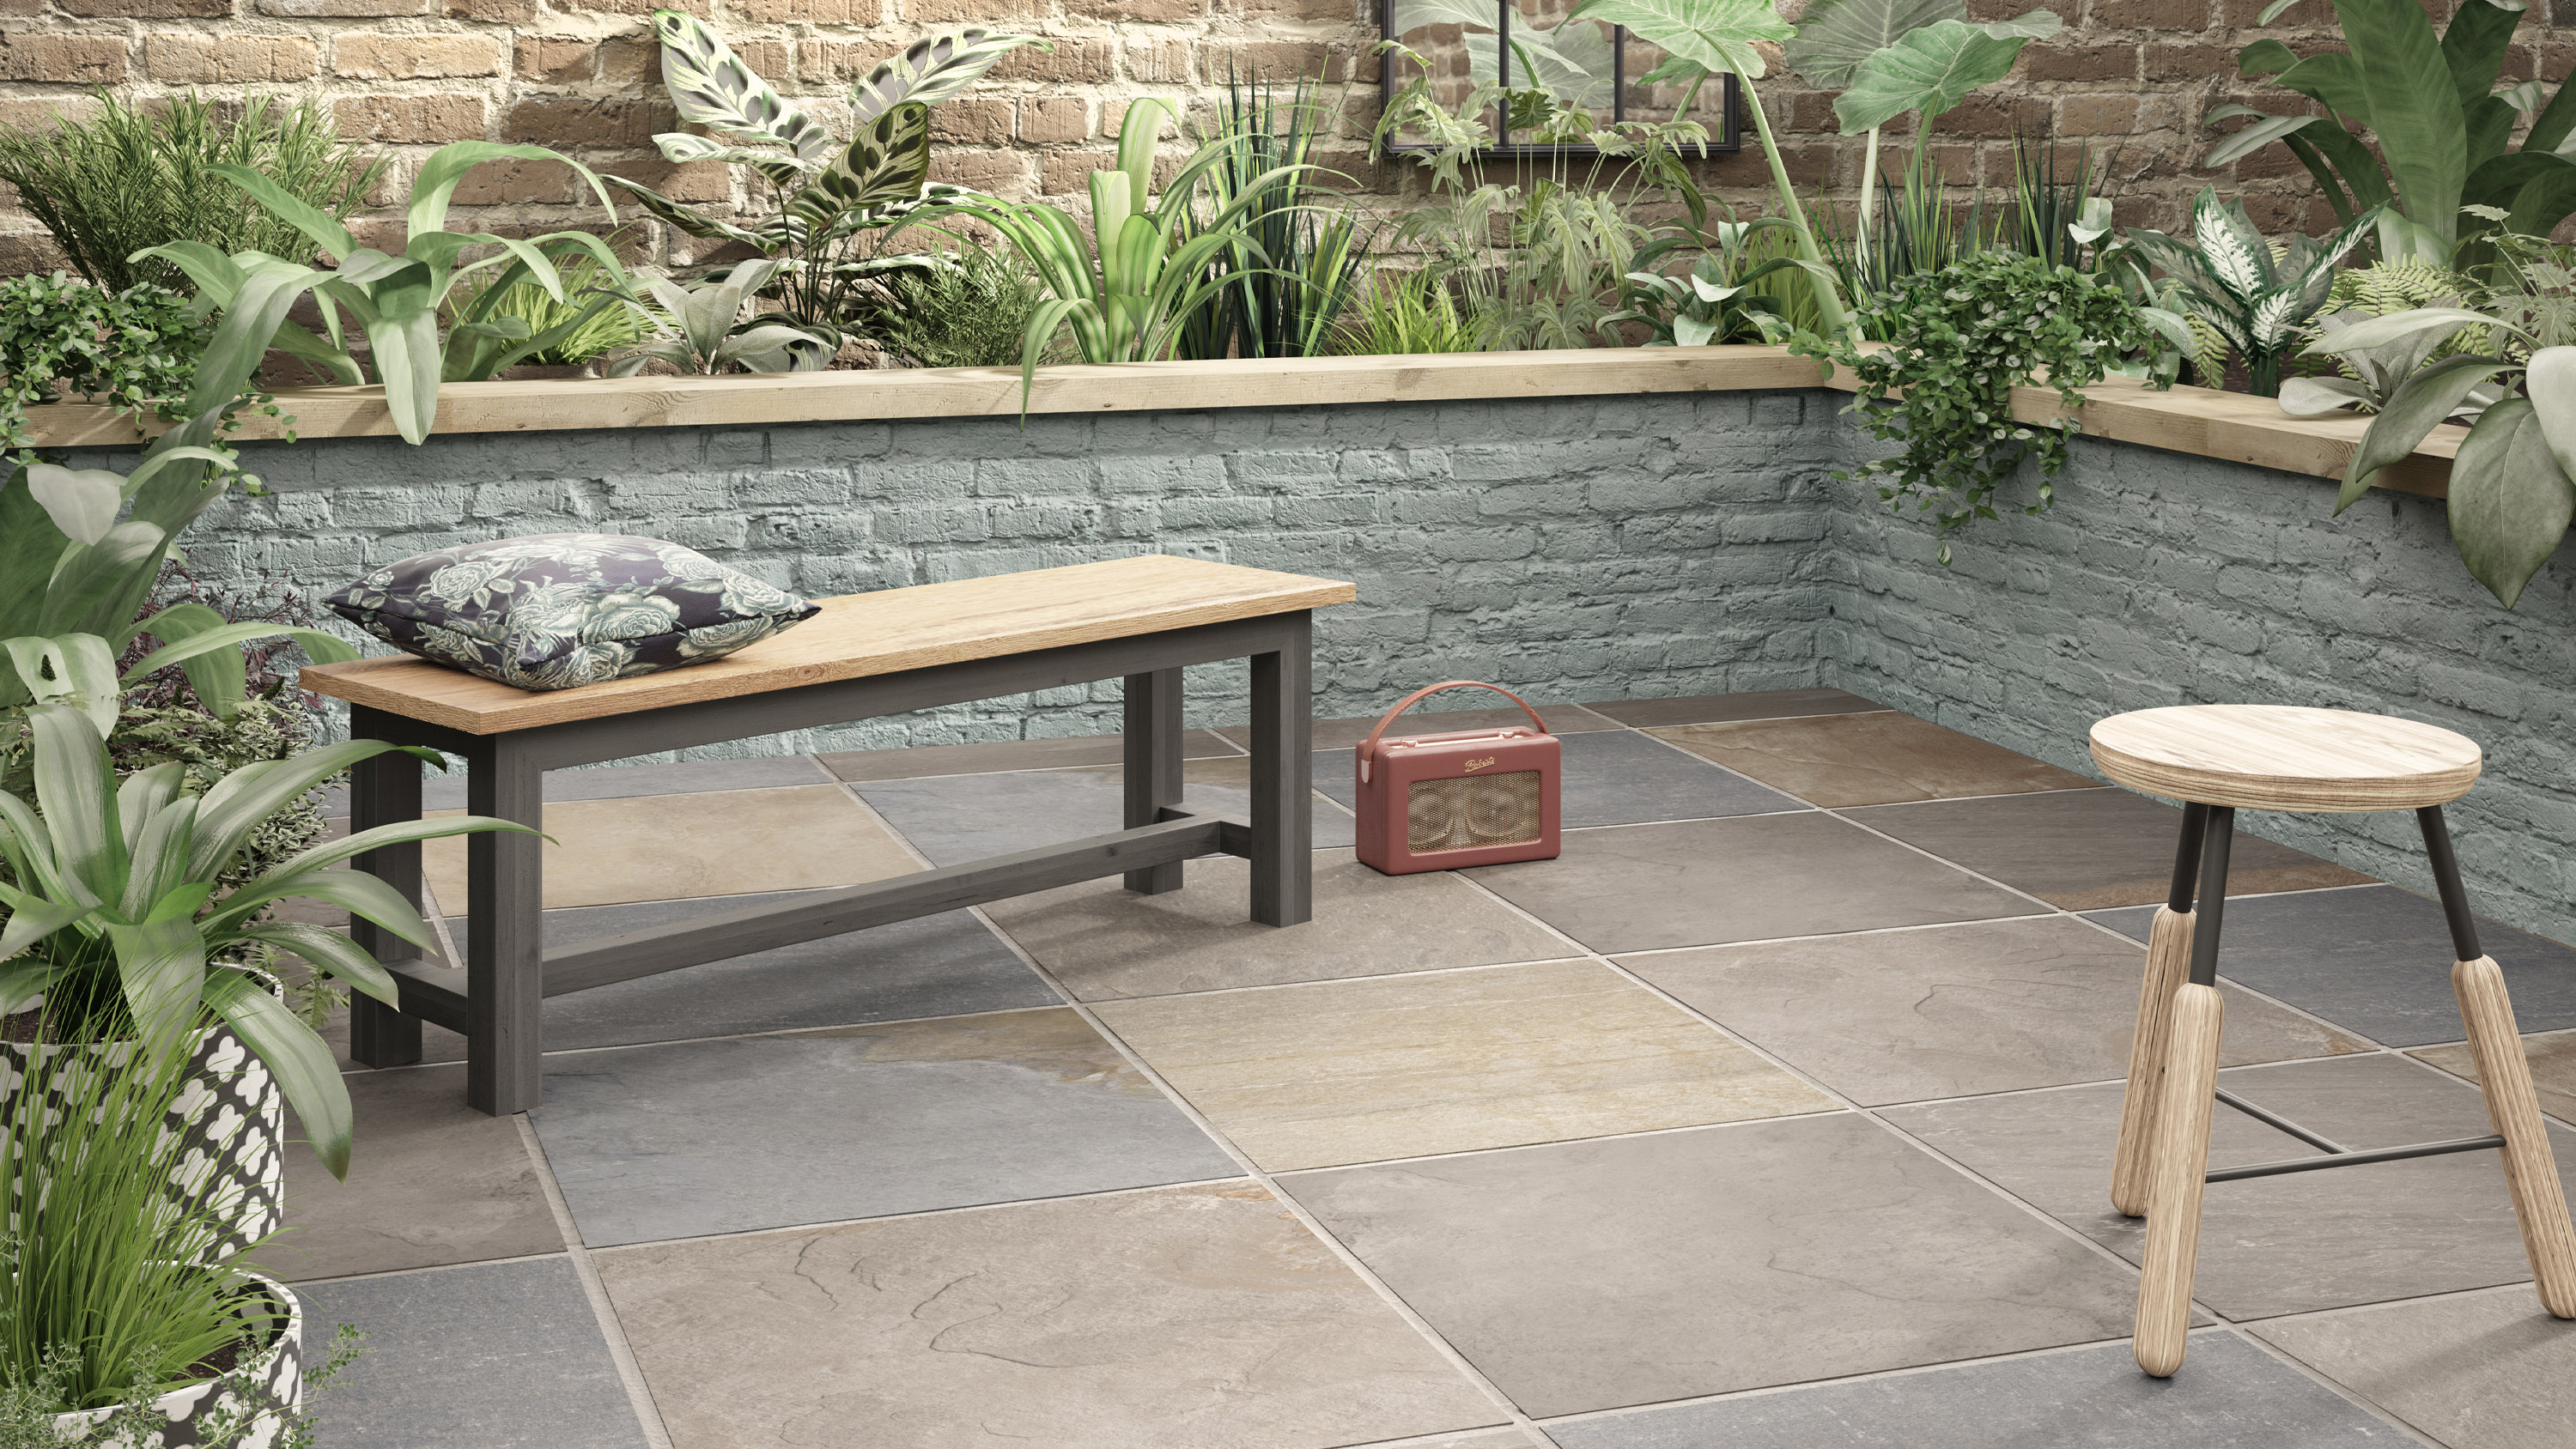 How To Lay Porcelain Tiles Outside, How To Install Outdoor Tile Patio